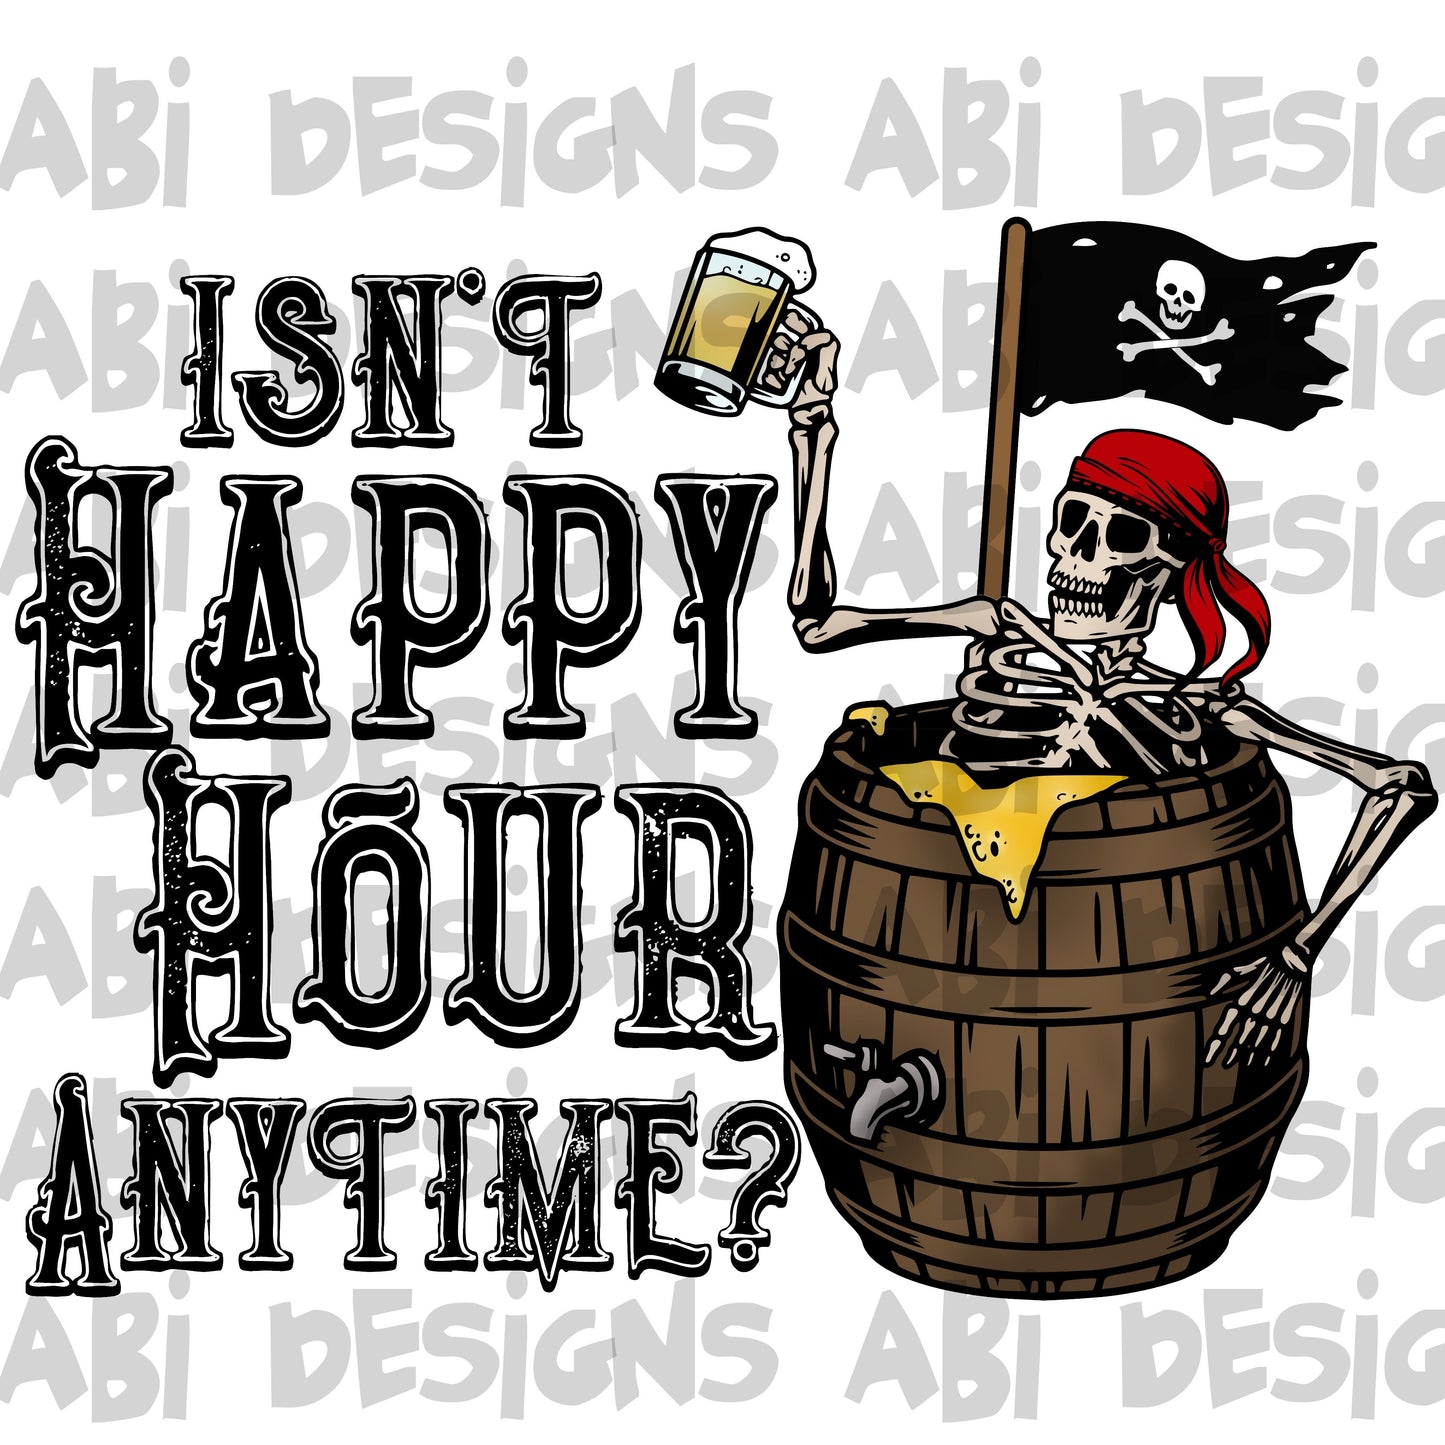 Isn’t happy hour anytime?- DTF